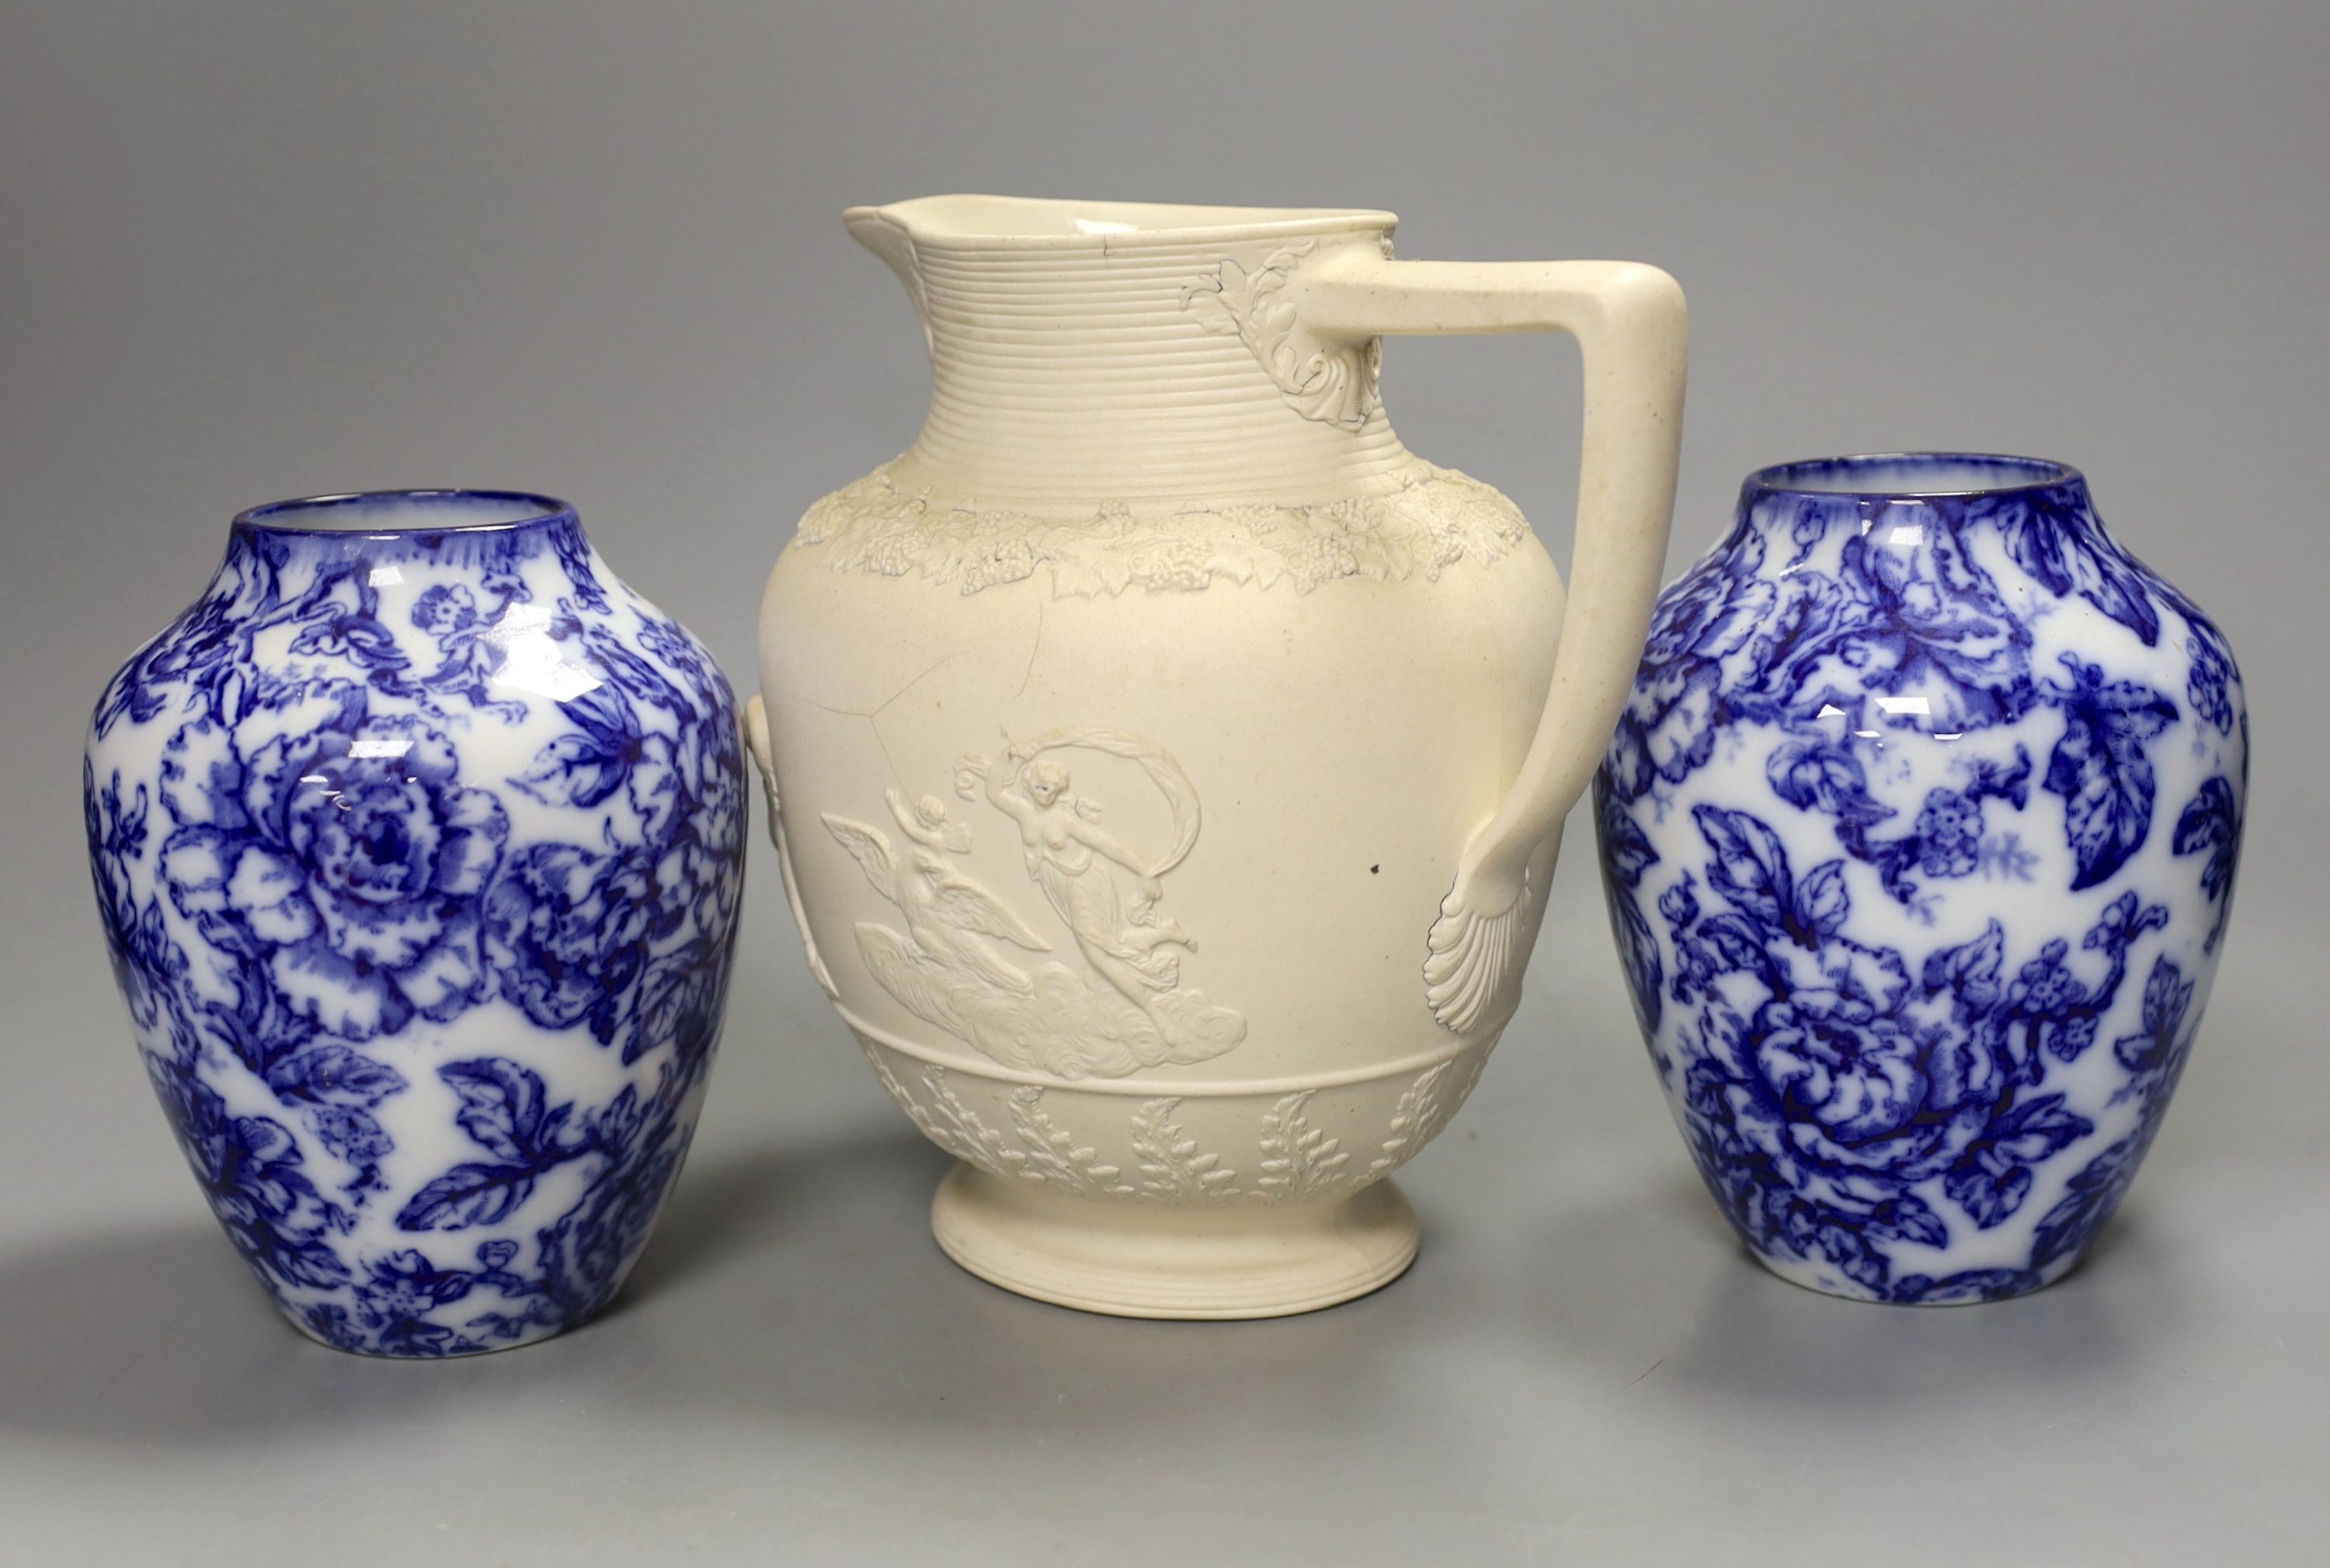 A pair of Keelings blue and white floral vases and a 19th century relief moulded white stoneware jug, vases 17 cms high.